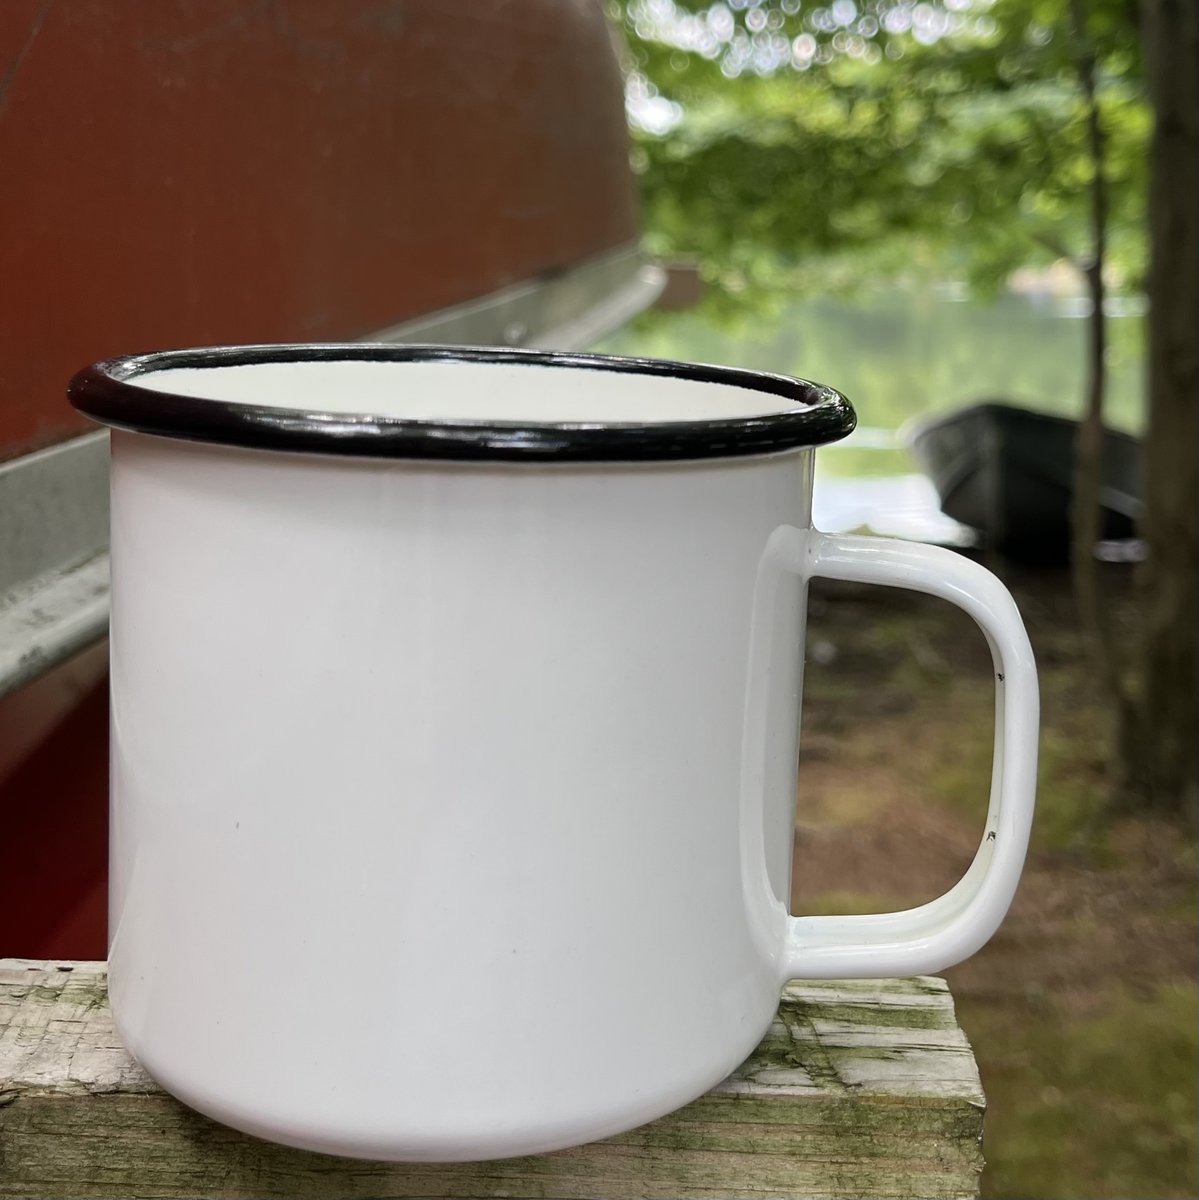 Our Country Cup is perfect for an old time country or retro program #campfire #campfiremugs #campfirecups #customtumblers #custommugs #enamelmugs #customprintedmugs #enamelcup #campmug #buffalony #familyowned #womanownedbusiness